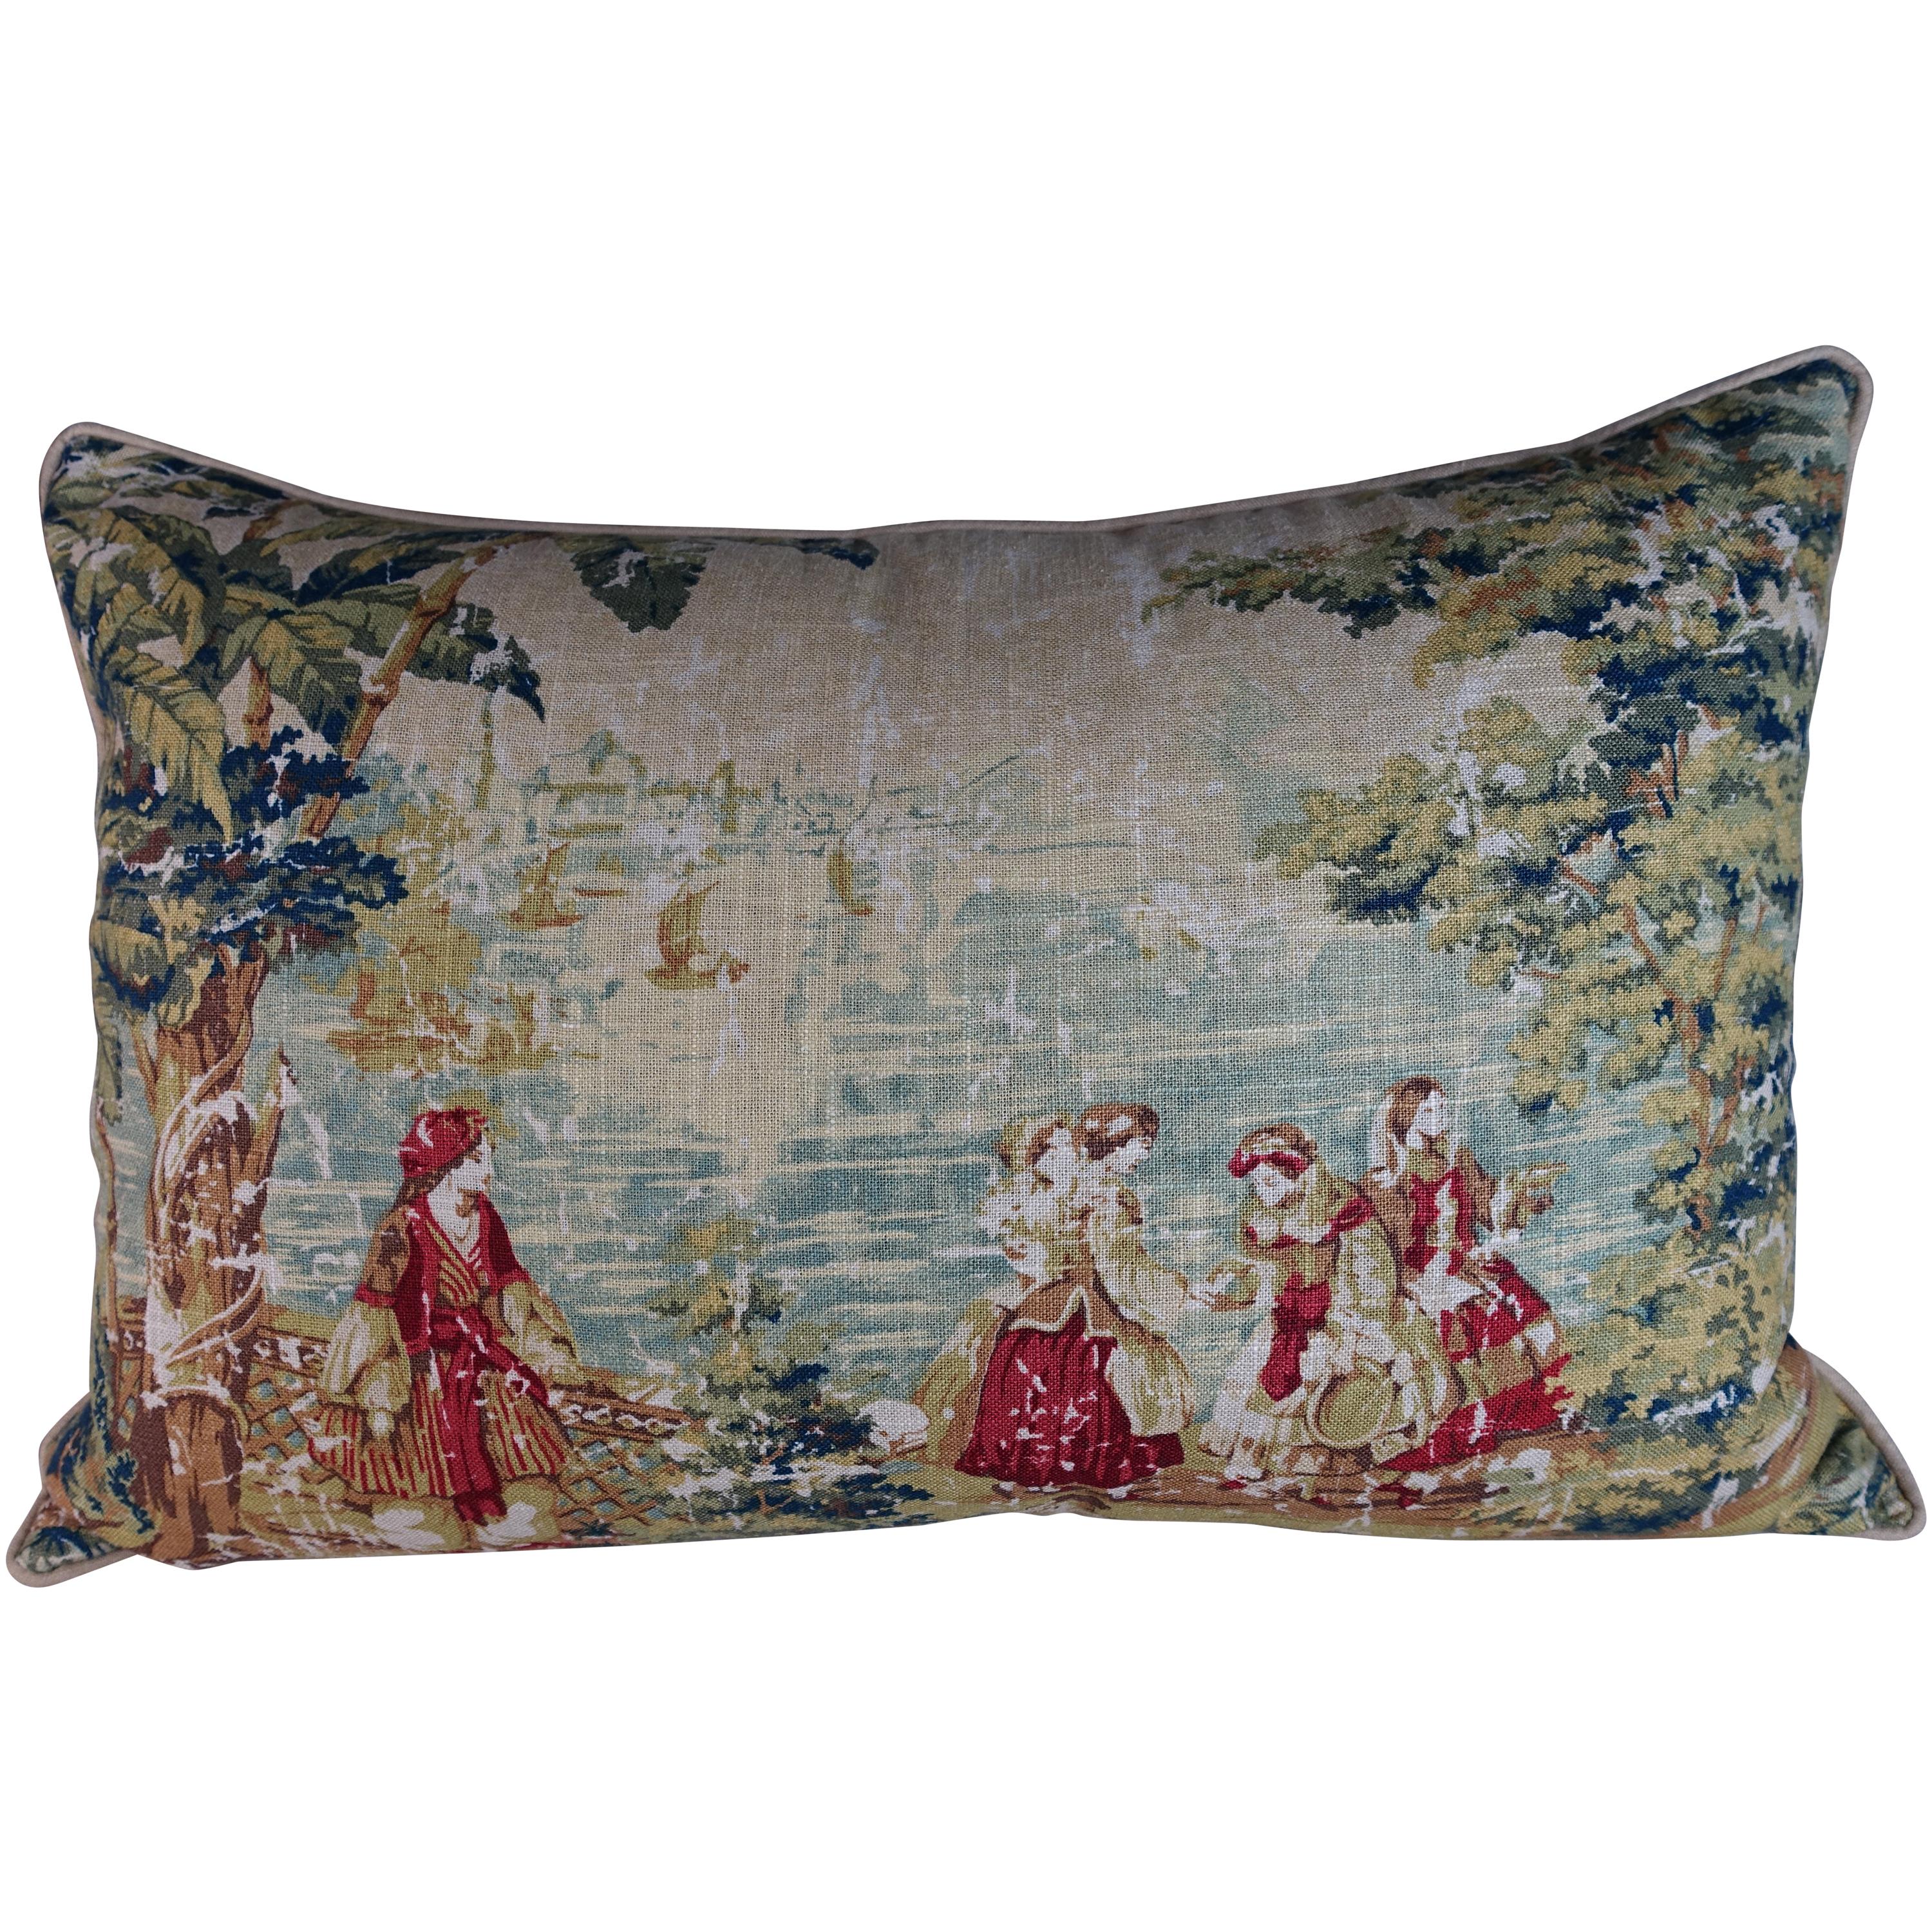 English Printed Linen Pillow with Figural Scene